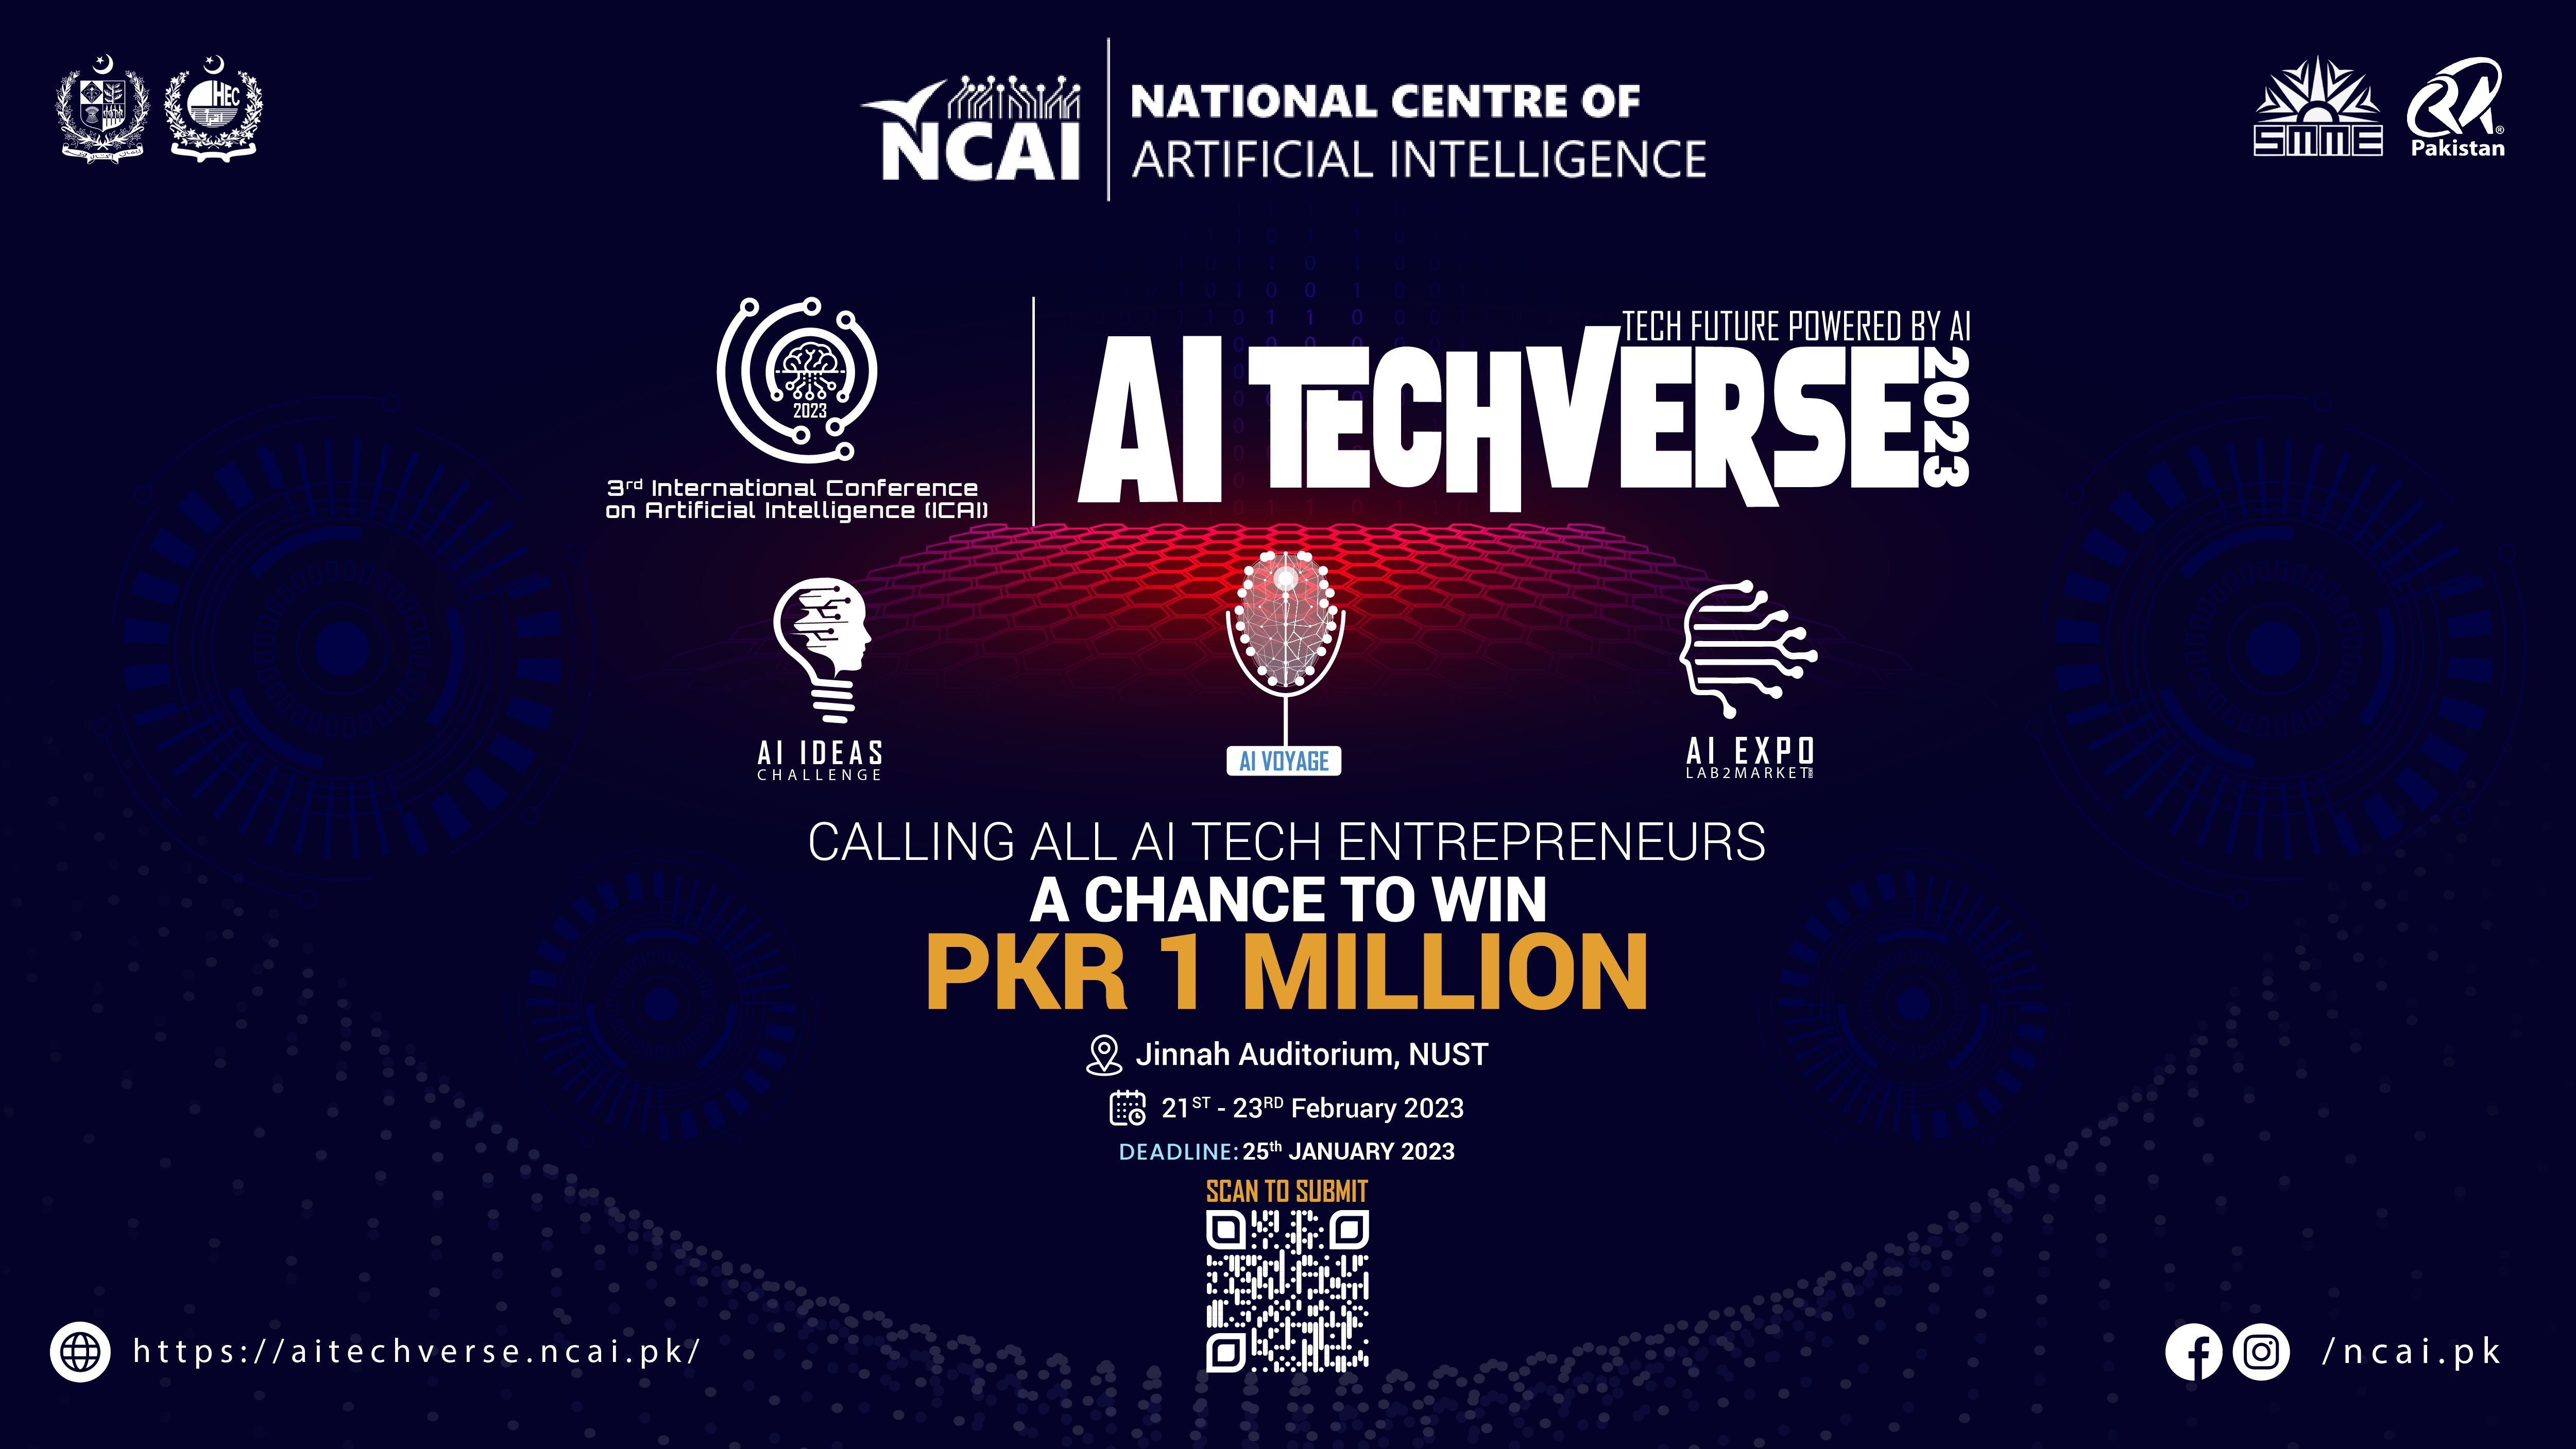 The National Center of Artificial Intelligence - NCAI, Pakistan calls tech entrepreneurs, AI startups, students, and researchers across Pakistan to participate in AI IDEAS/Startup Challenge to win 1 Million Rupees at the AI Techverse 2023. 